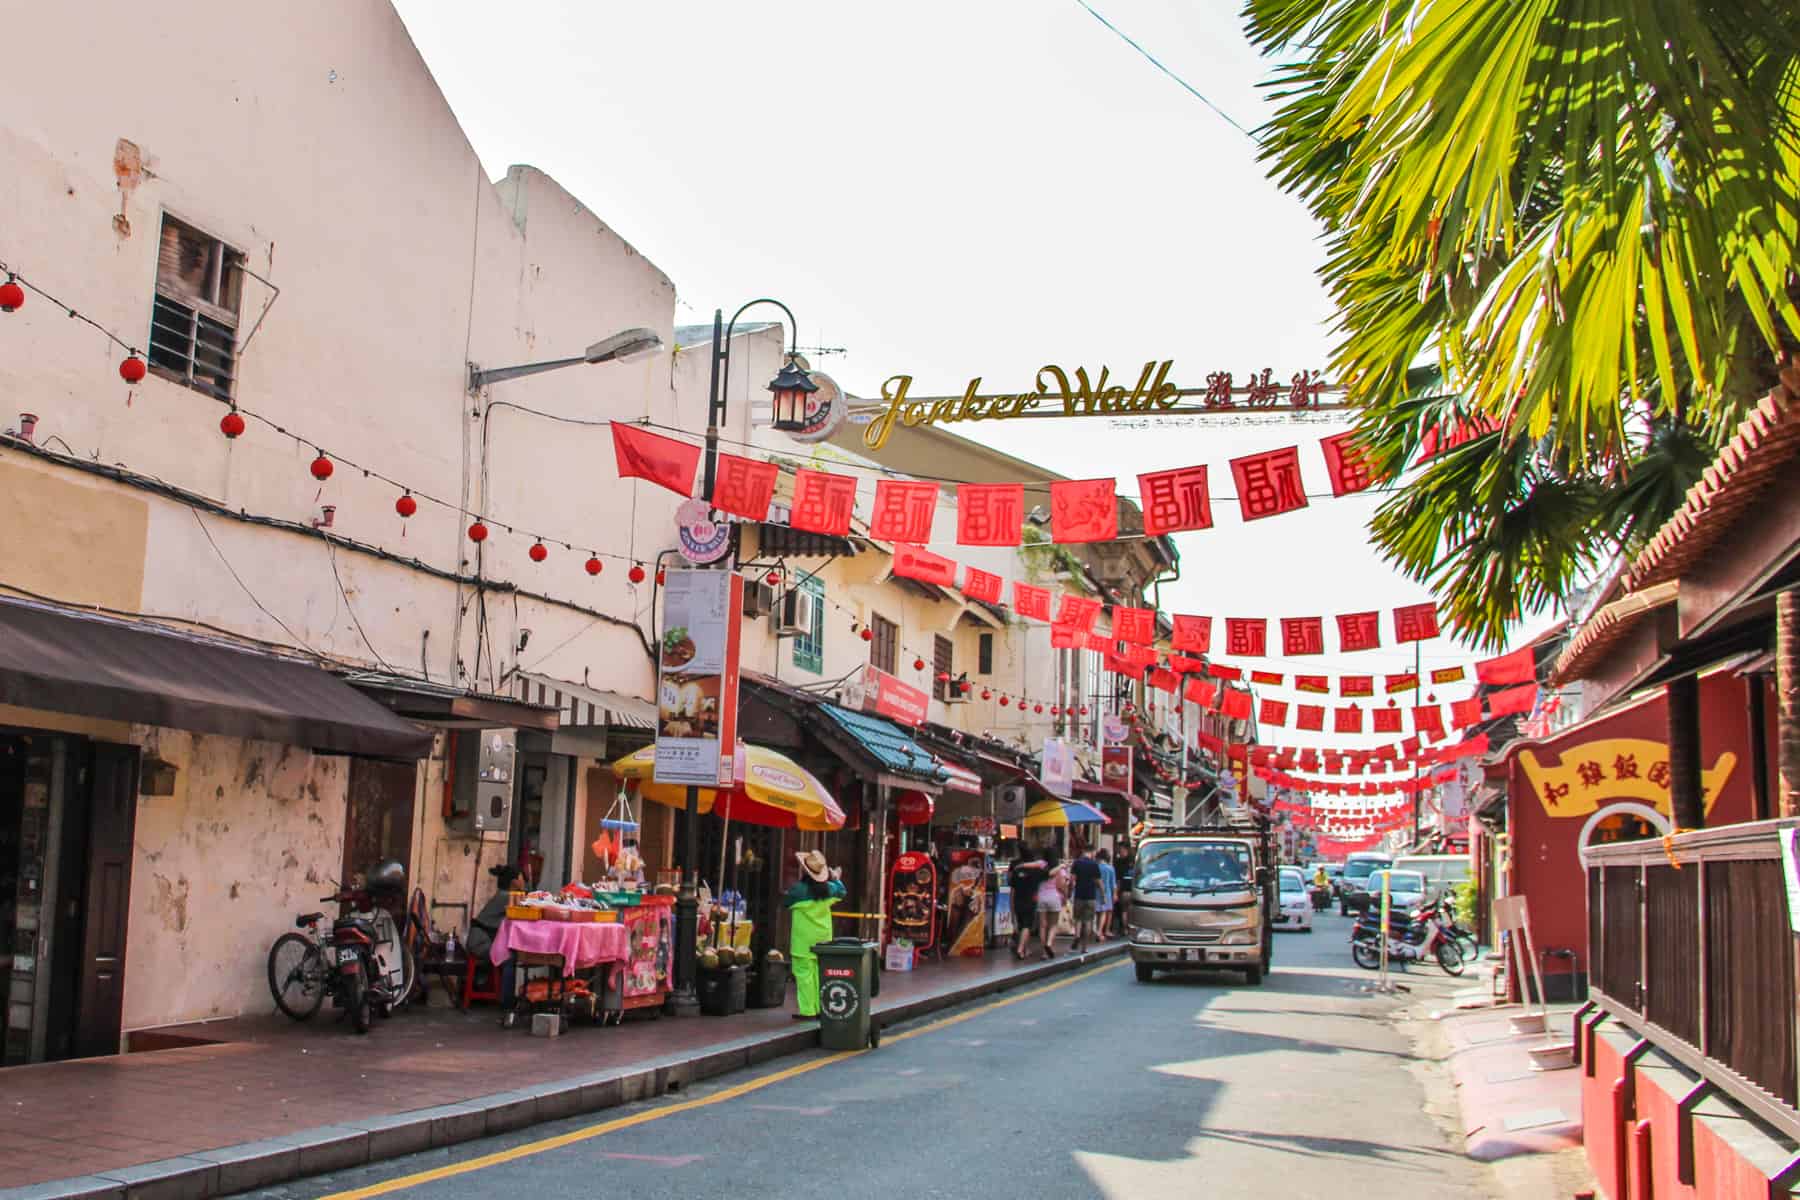 Jonker Street (the centre street of Chinatown) in Melaka, Malaysia marked by red decorative flags with Chinese symbols